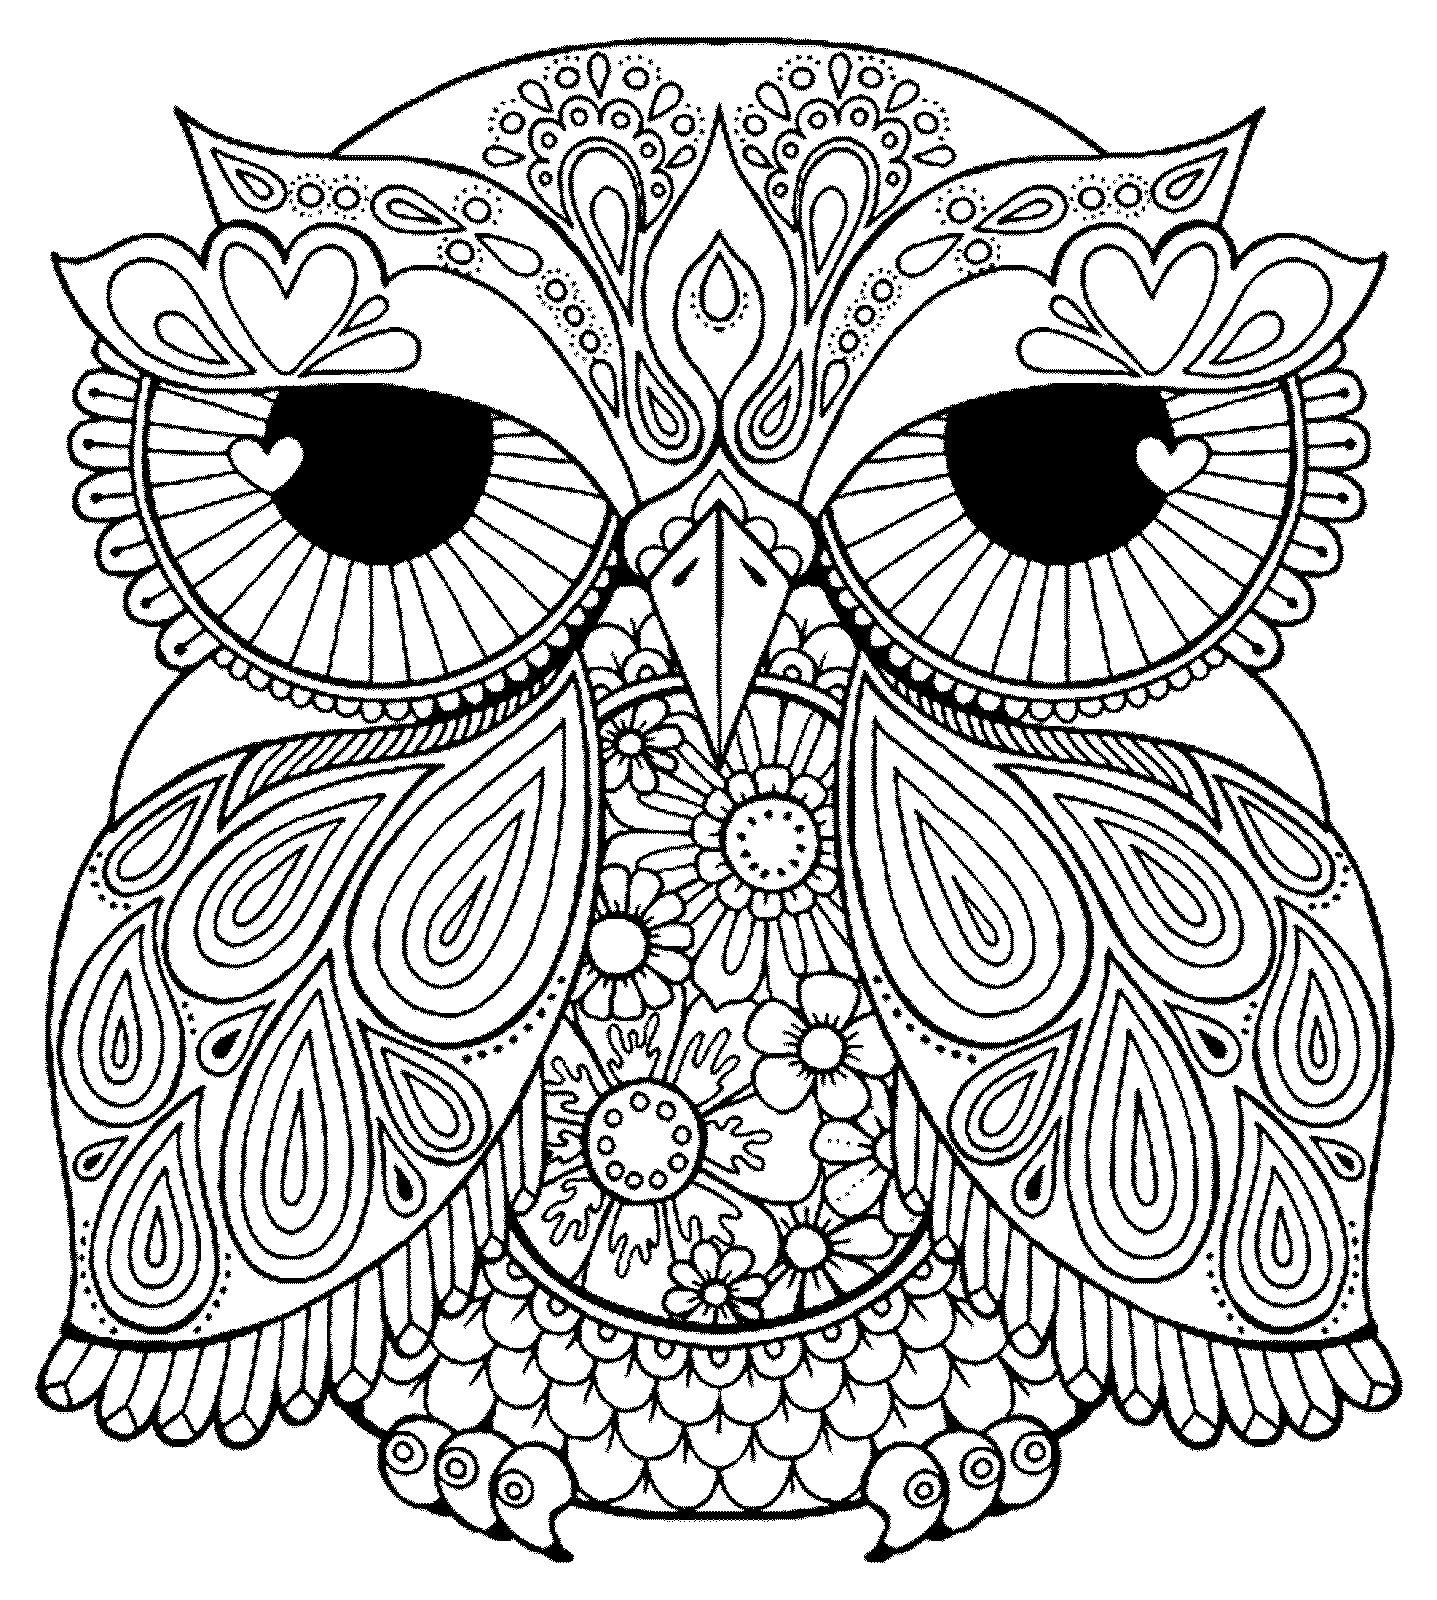 adult coloring pages birds 3 2 adult coloring pages printable